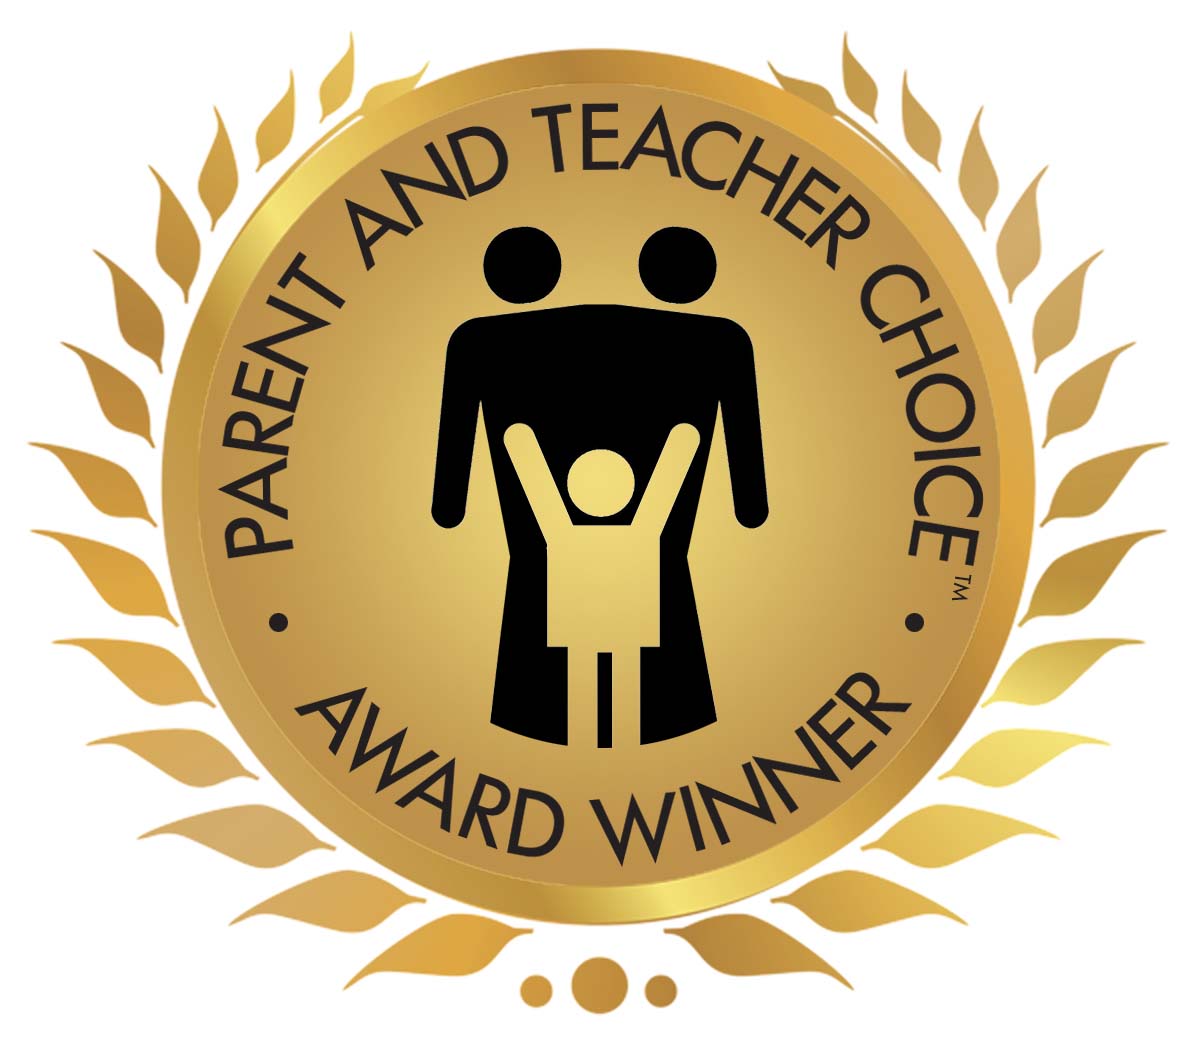 Parent and Teacher Choice Award - a gold circle with leaves surrounding it. 